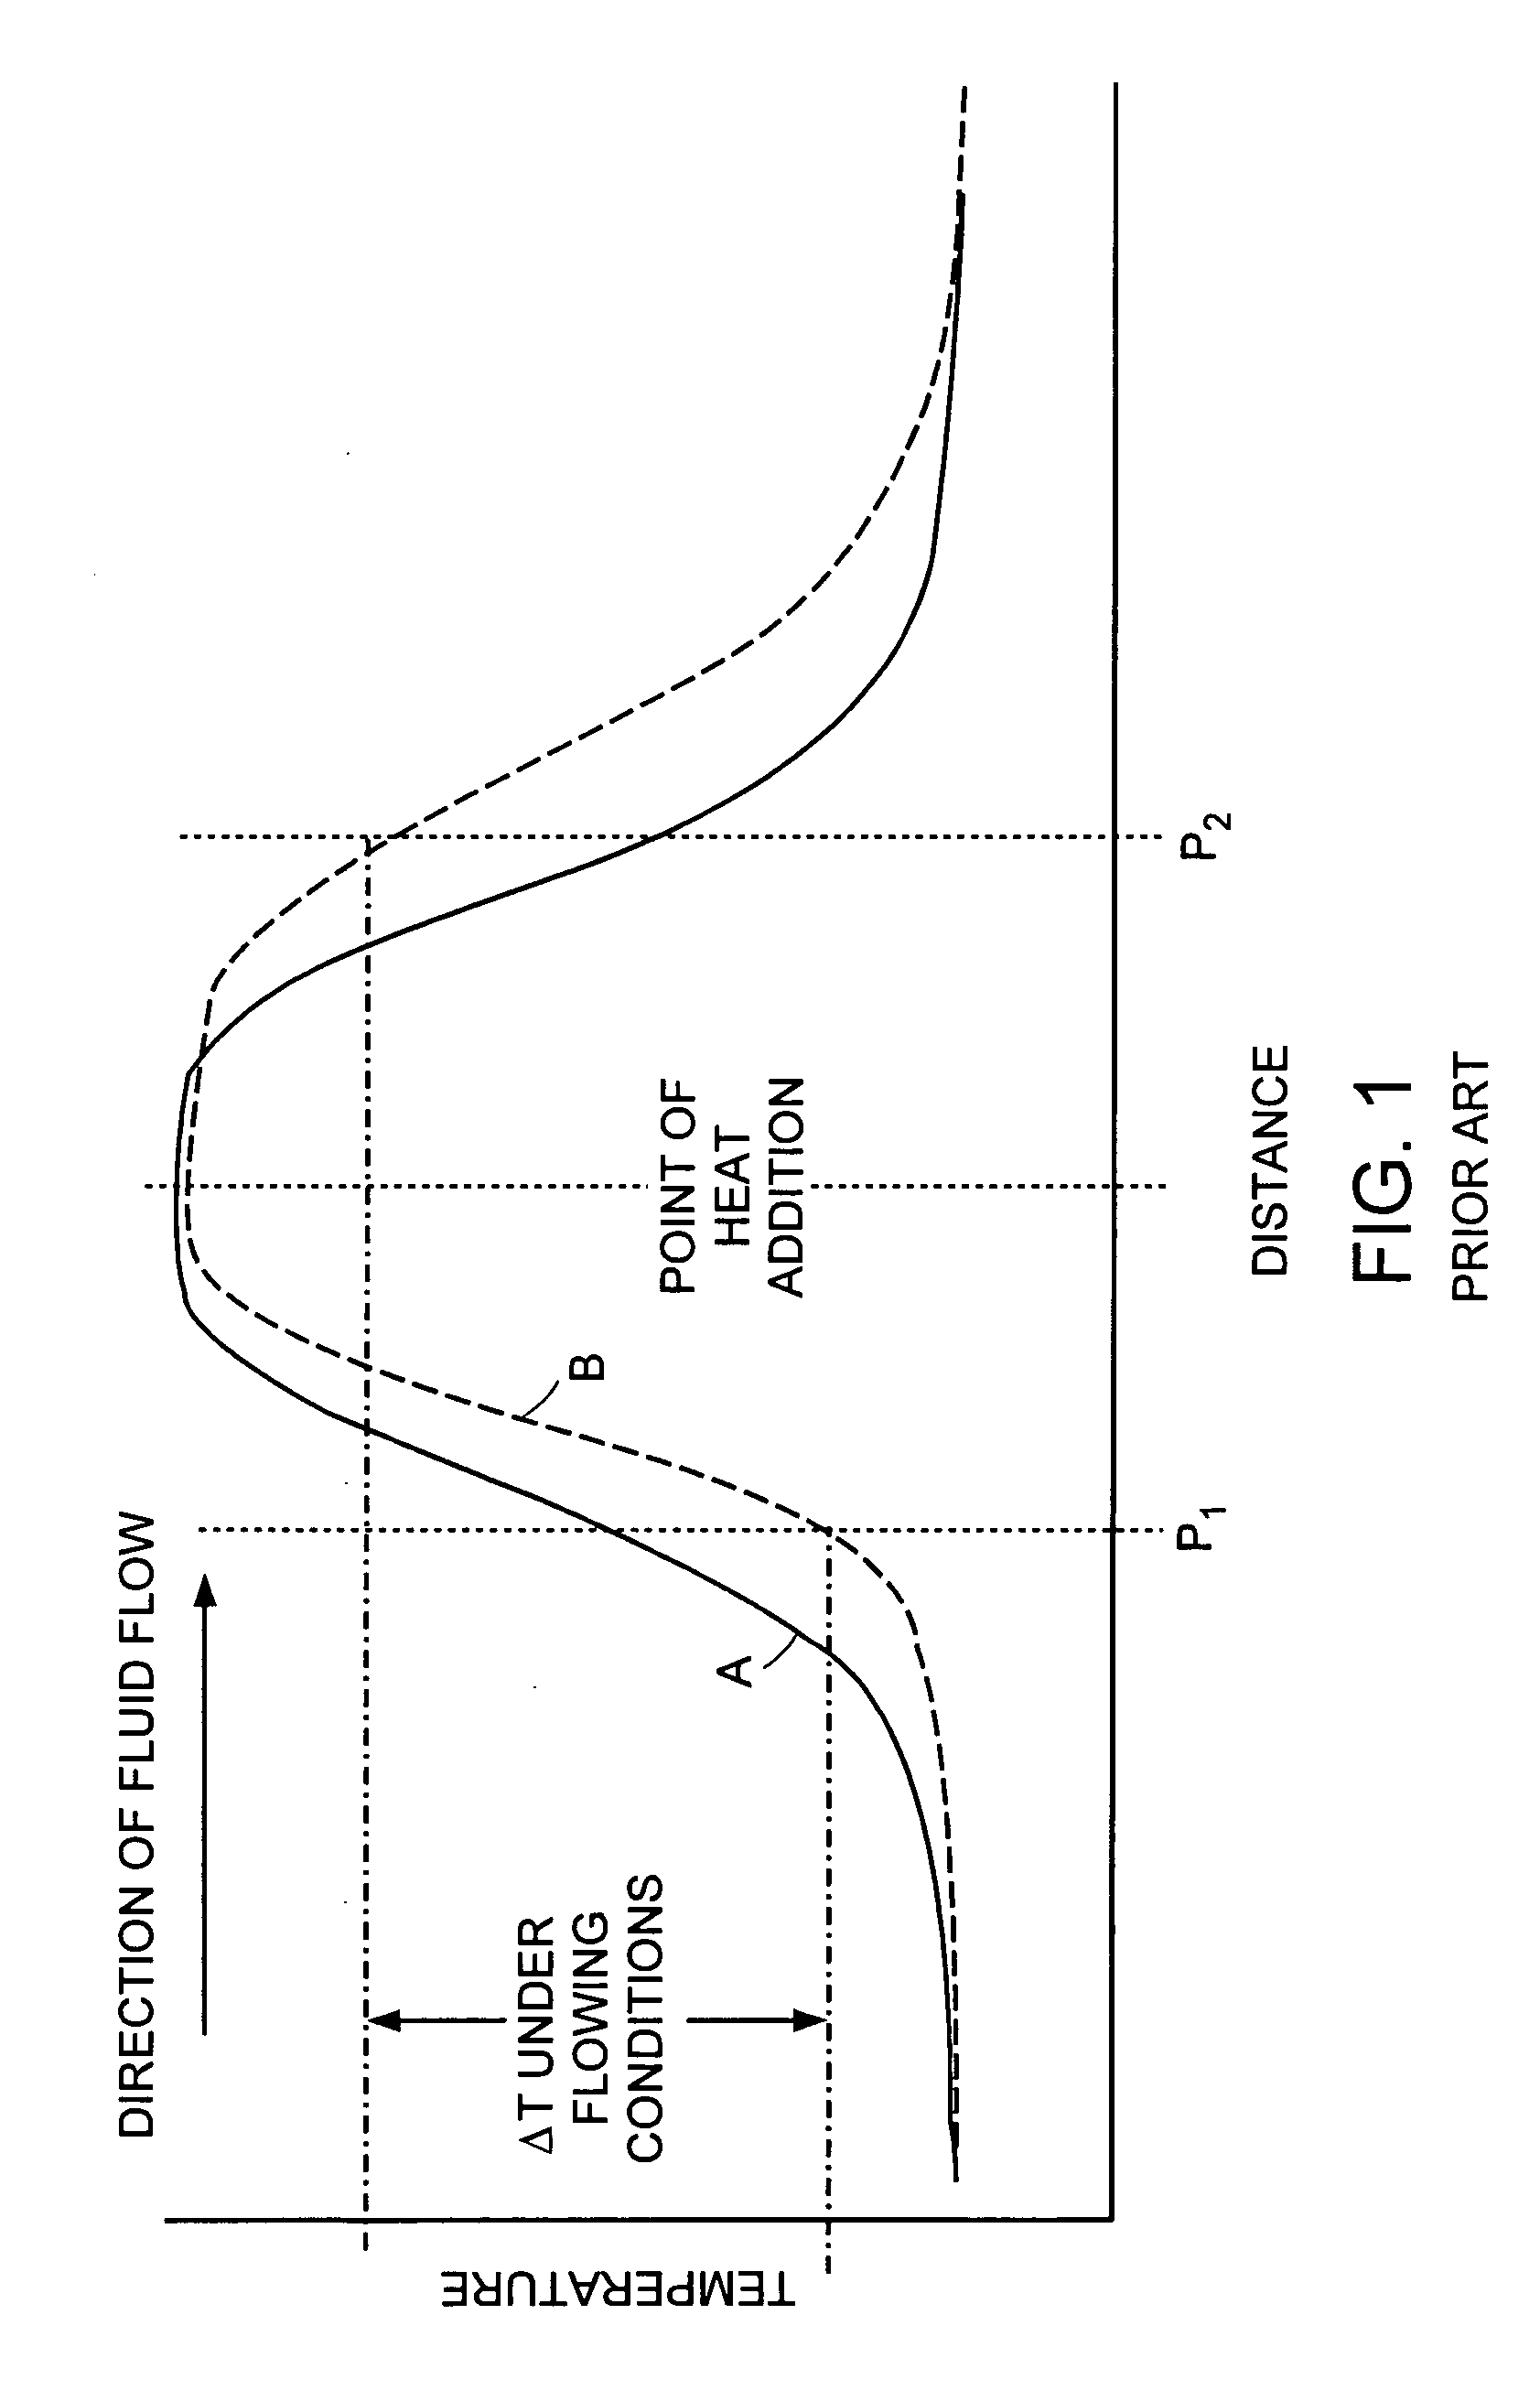 Flow sensing apparatus used to monitor/provide feedback to a split flow pumping system